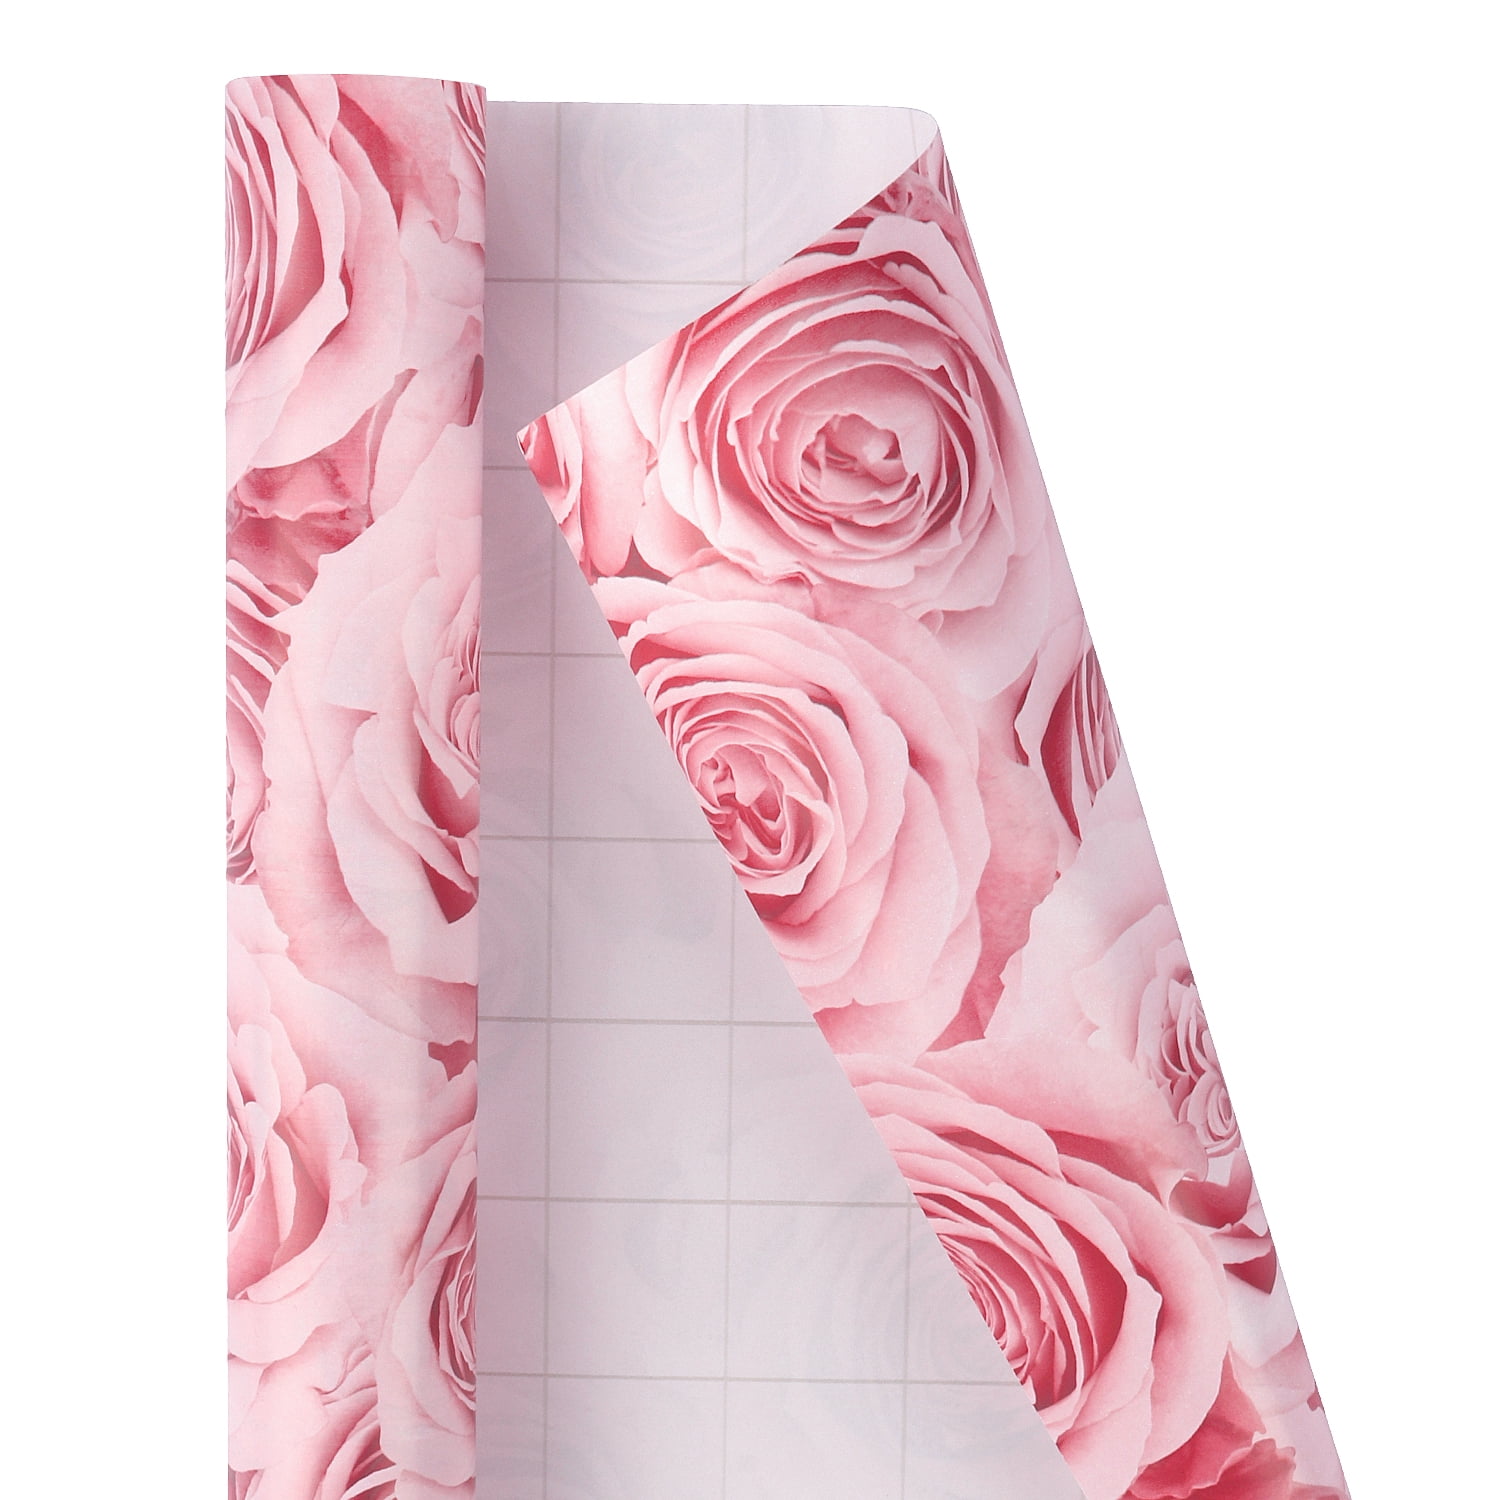 Vintage Creations Plus Gift Wrap Roses Pink 2 Sheets 20 x 27 Wrapping  Paper